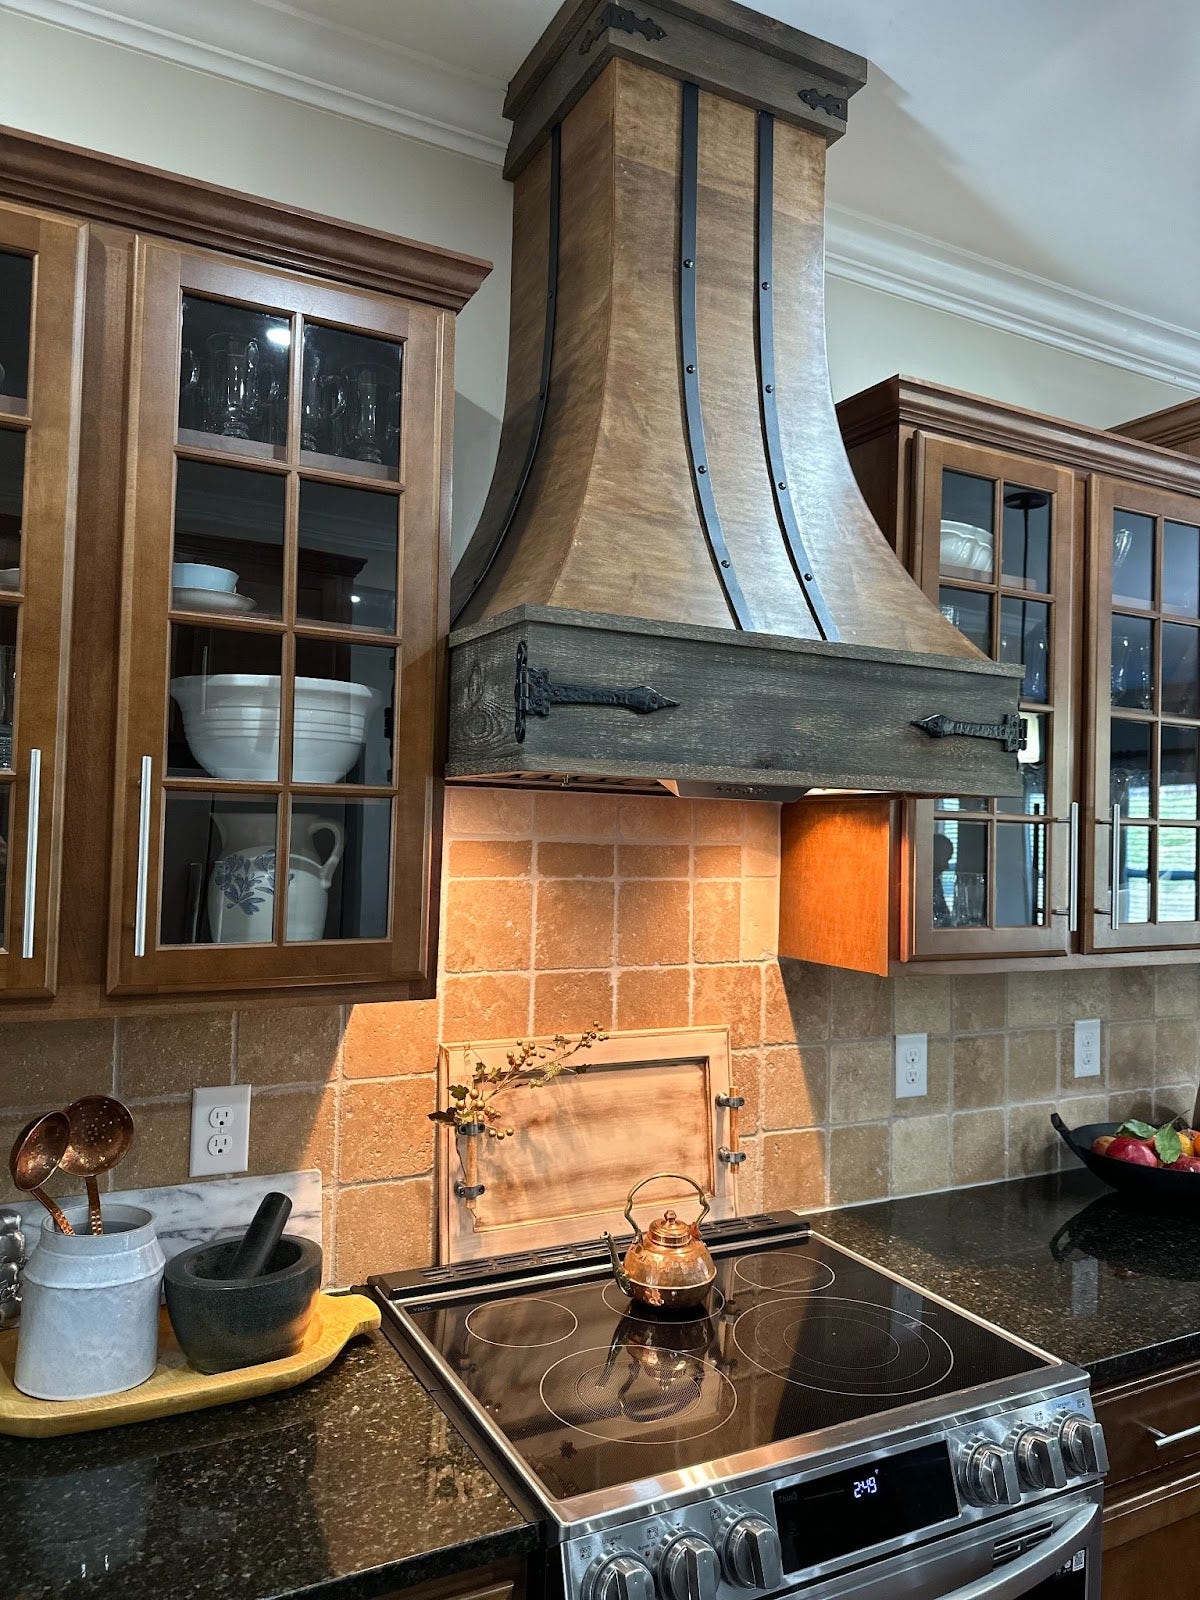 Modern kitchen with stainless steel appliances and a Proline range hood, perfect for entertaining. - Proline Range Hoods - prolinerangehoods.com 